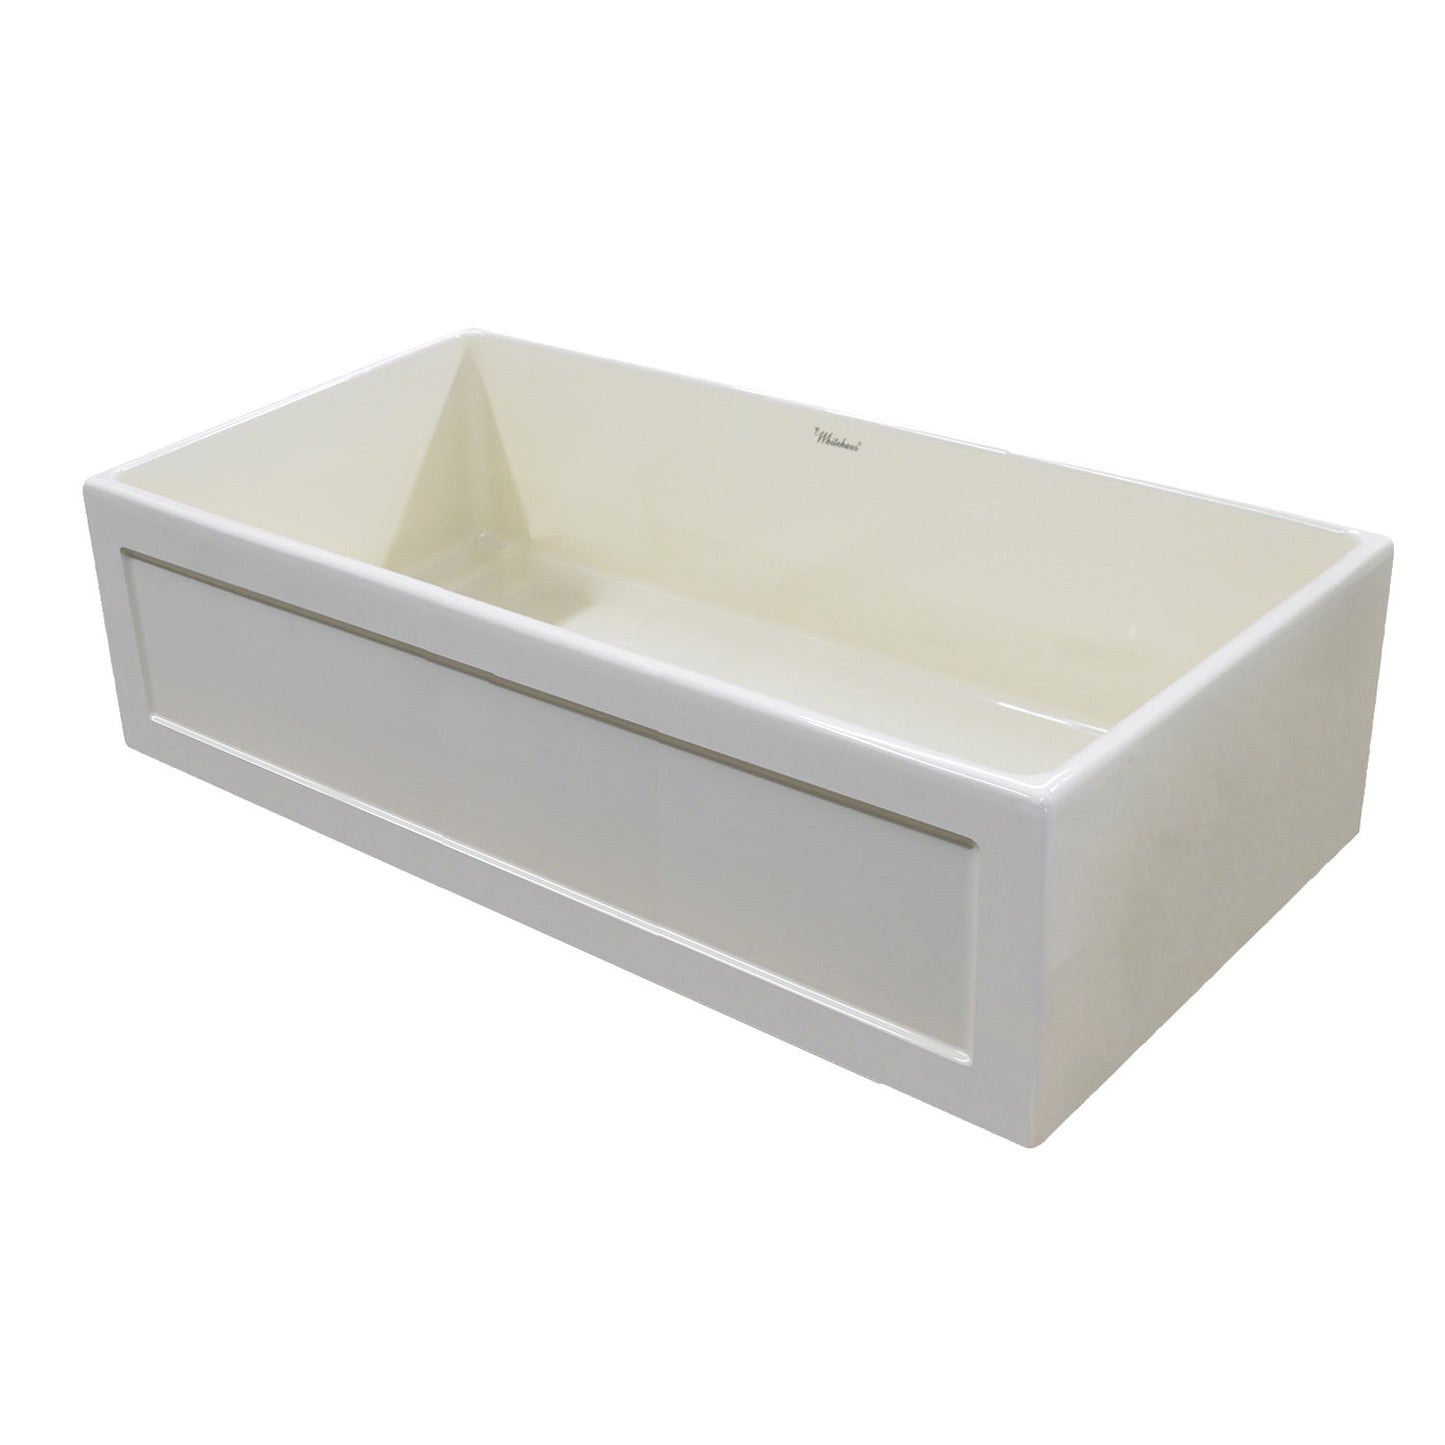 Whitehaus WHPLCON3319-BISCUIT Fireclay 33" Large Reversible Sink with Concave Front Apron on One Side